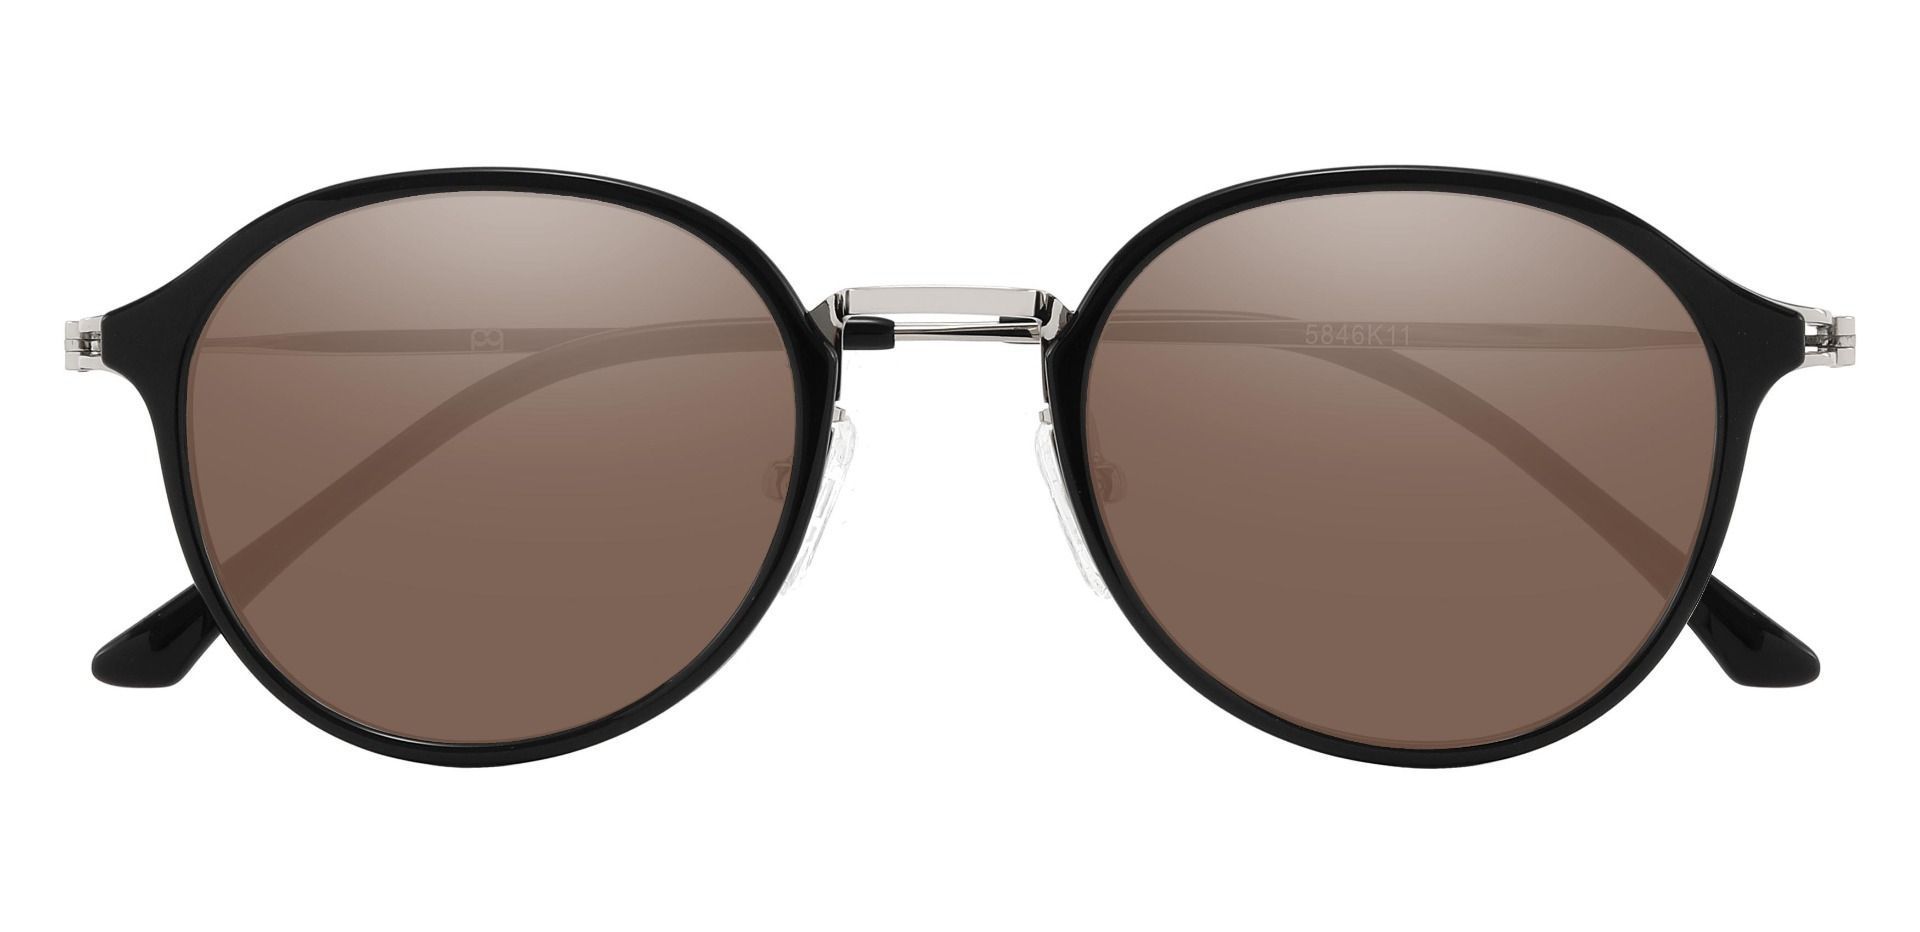 Billings Round Non-Rx Sunglasses - Black Frame With Brown Lenses